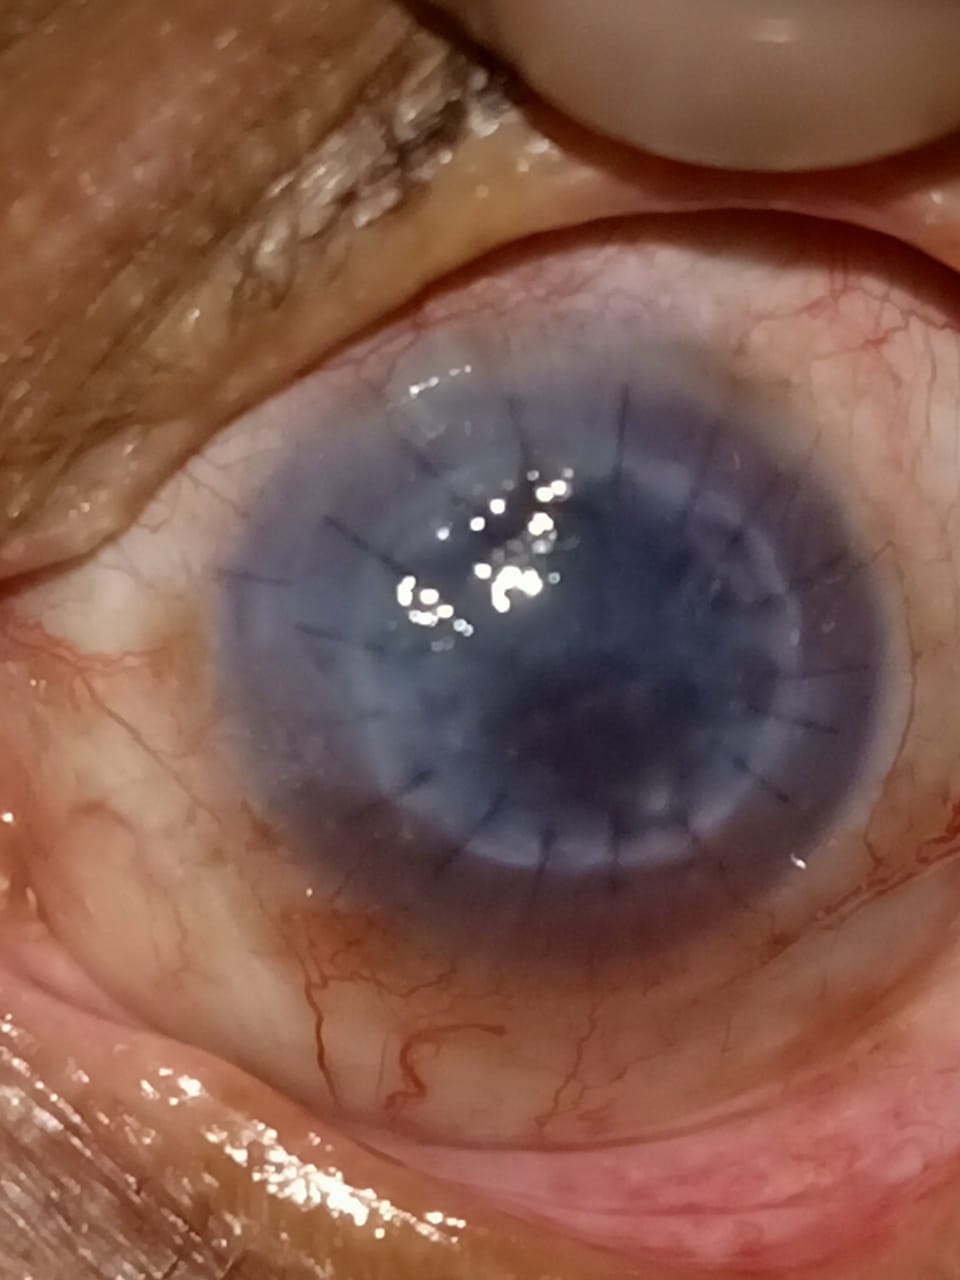 Digital slit lamp image of the left eye of the patient depicting mild congestion, epithelial edema, stromal edema, well oppos